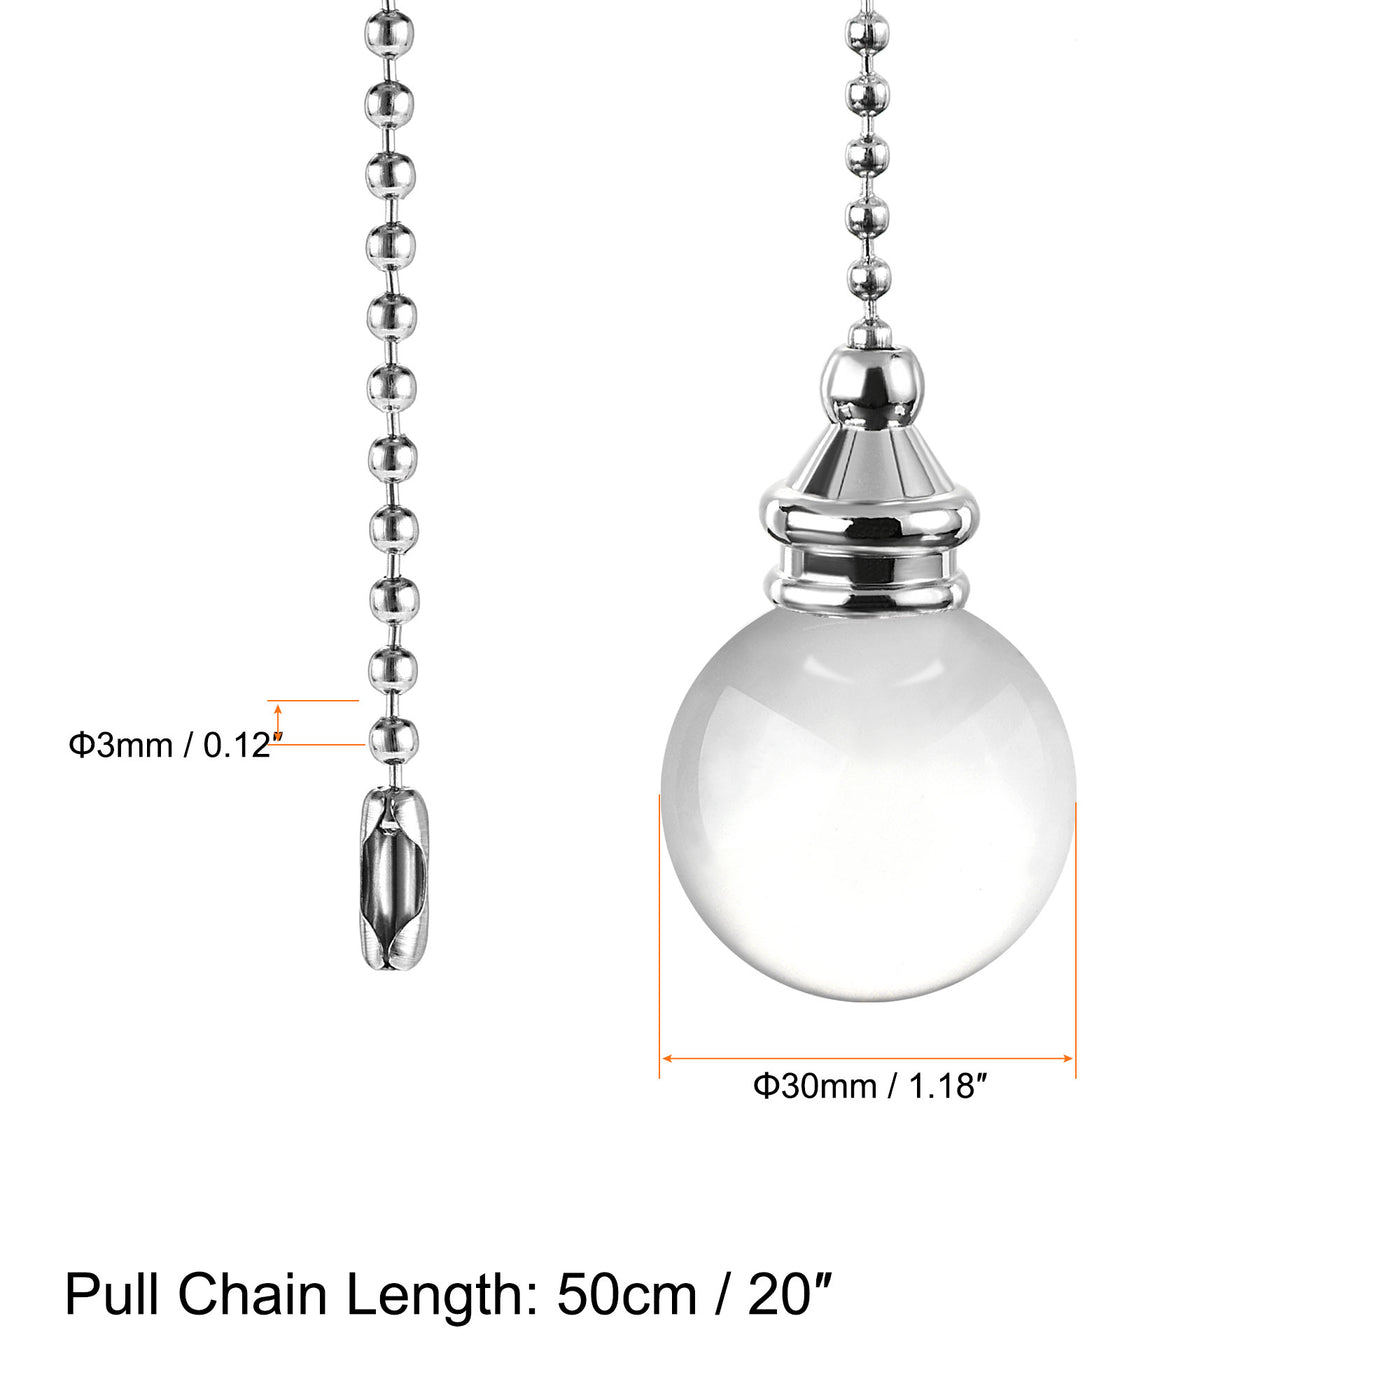 uxcell Uxcell Ceiling Fan Pull Chain, 20 Inch Fan Pull Chain Ornament Extension Lighting Accessories, 30mm Crystal Ball Pendant, Clear 2Pcs